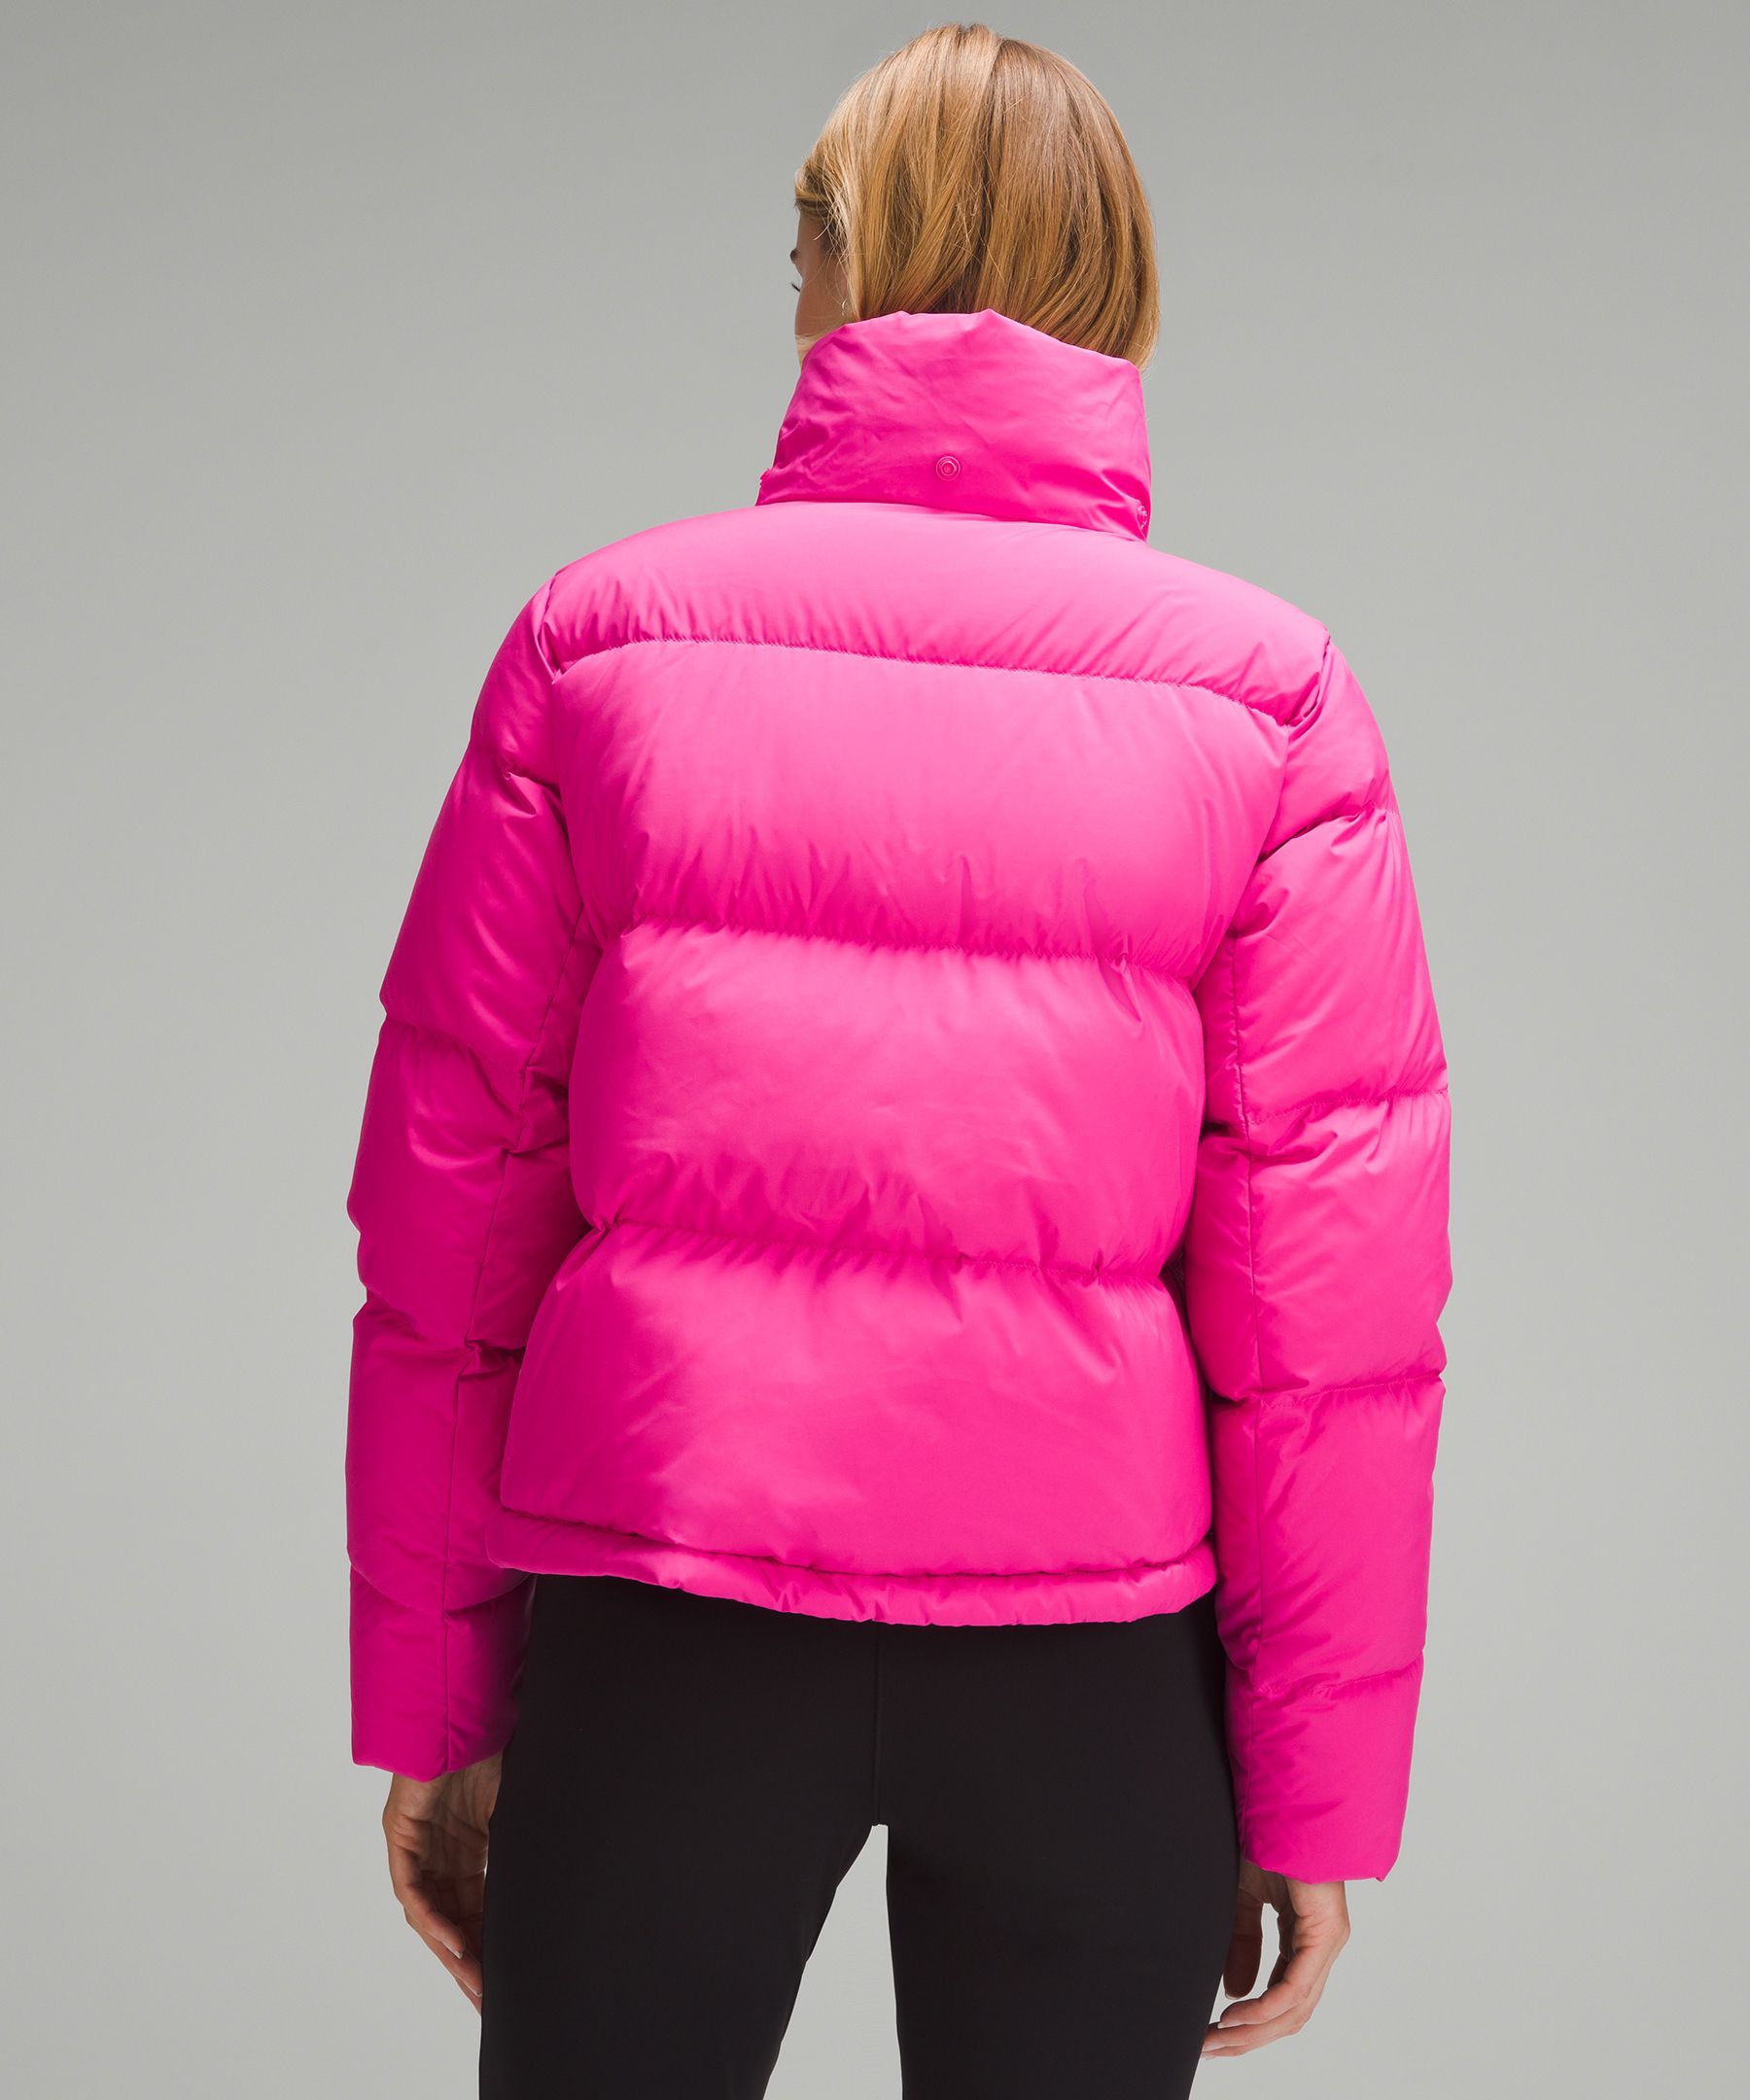 SONIC PINK Wunder Puff Cropped Vest and Jacket - just dropped in NZ/AUS!!!  : r/lululemon